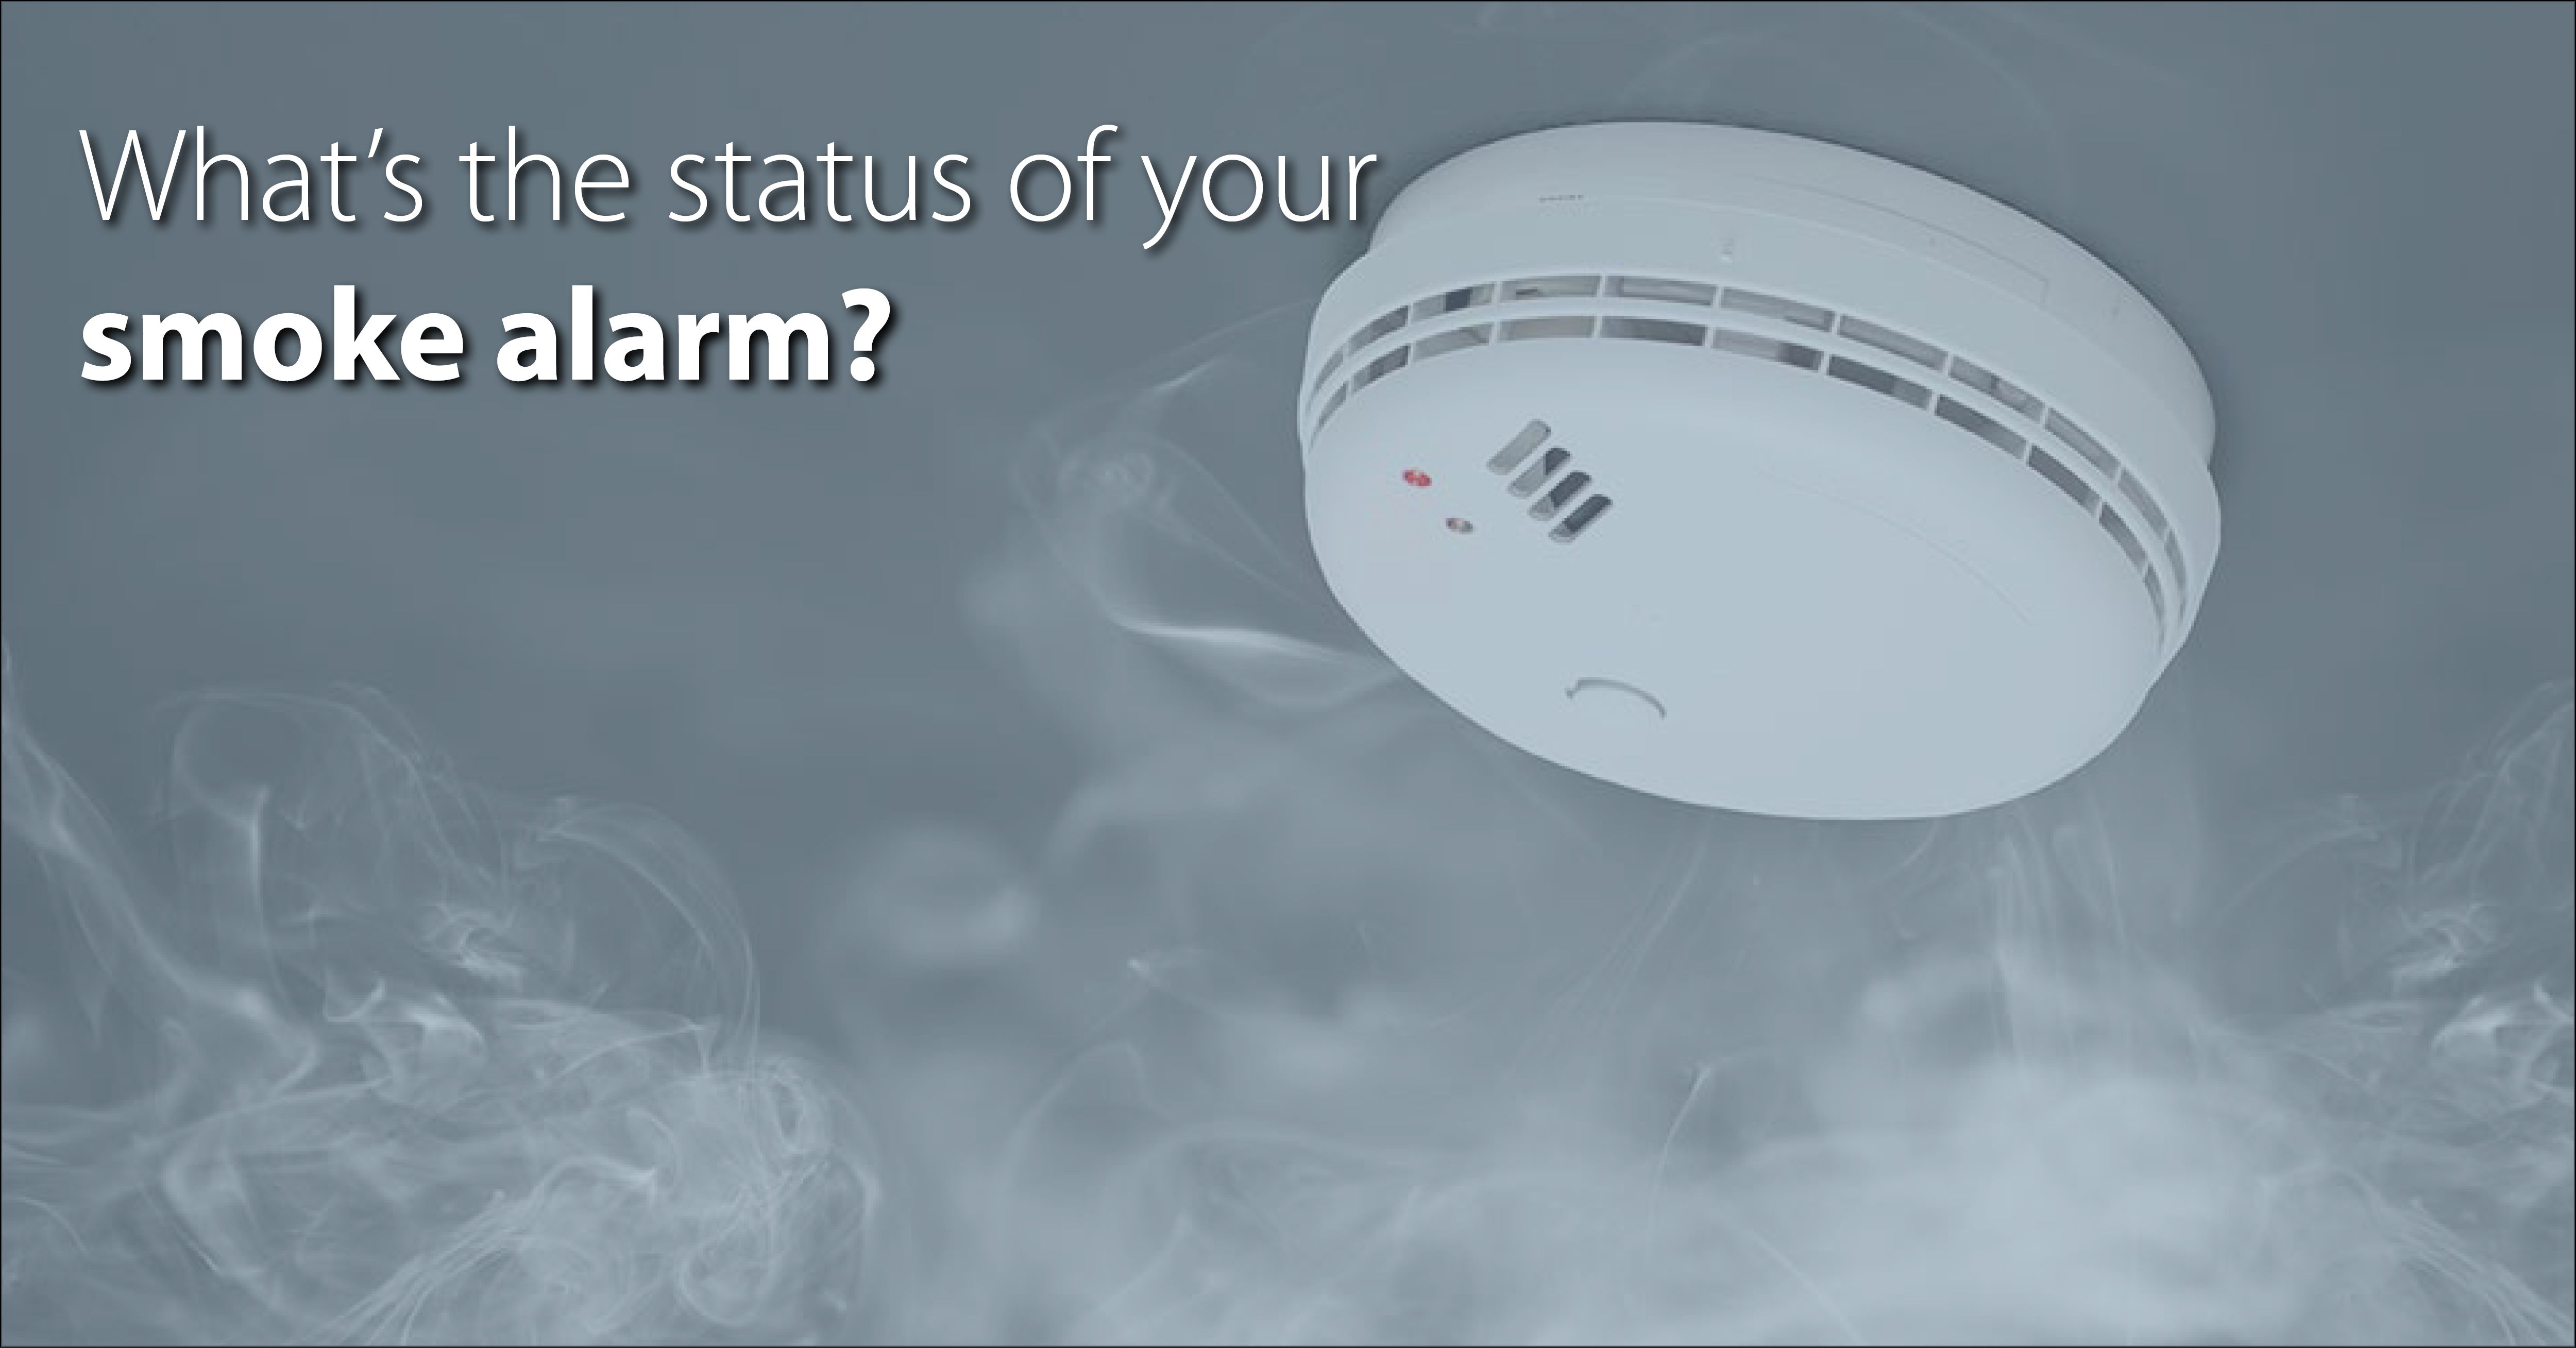 austin residents to check their fire alarms